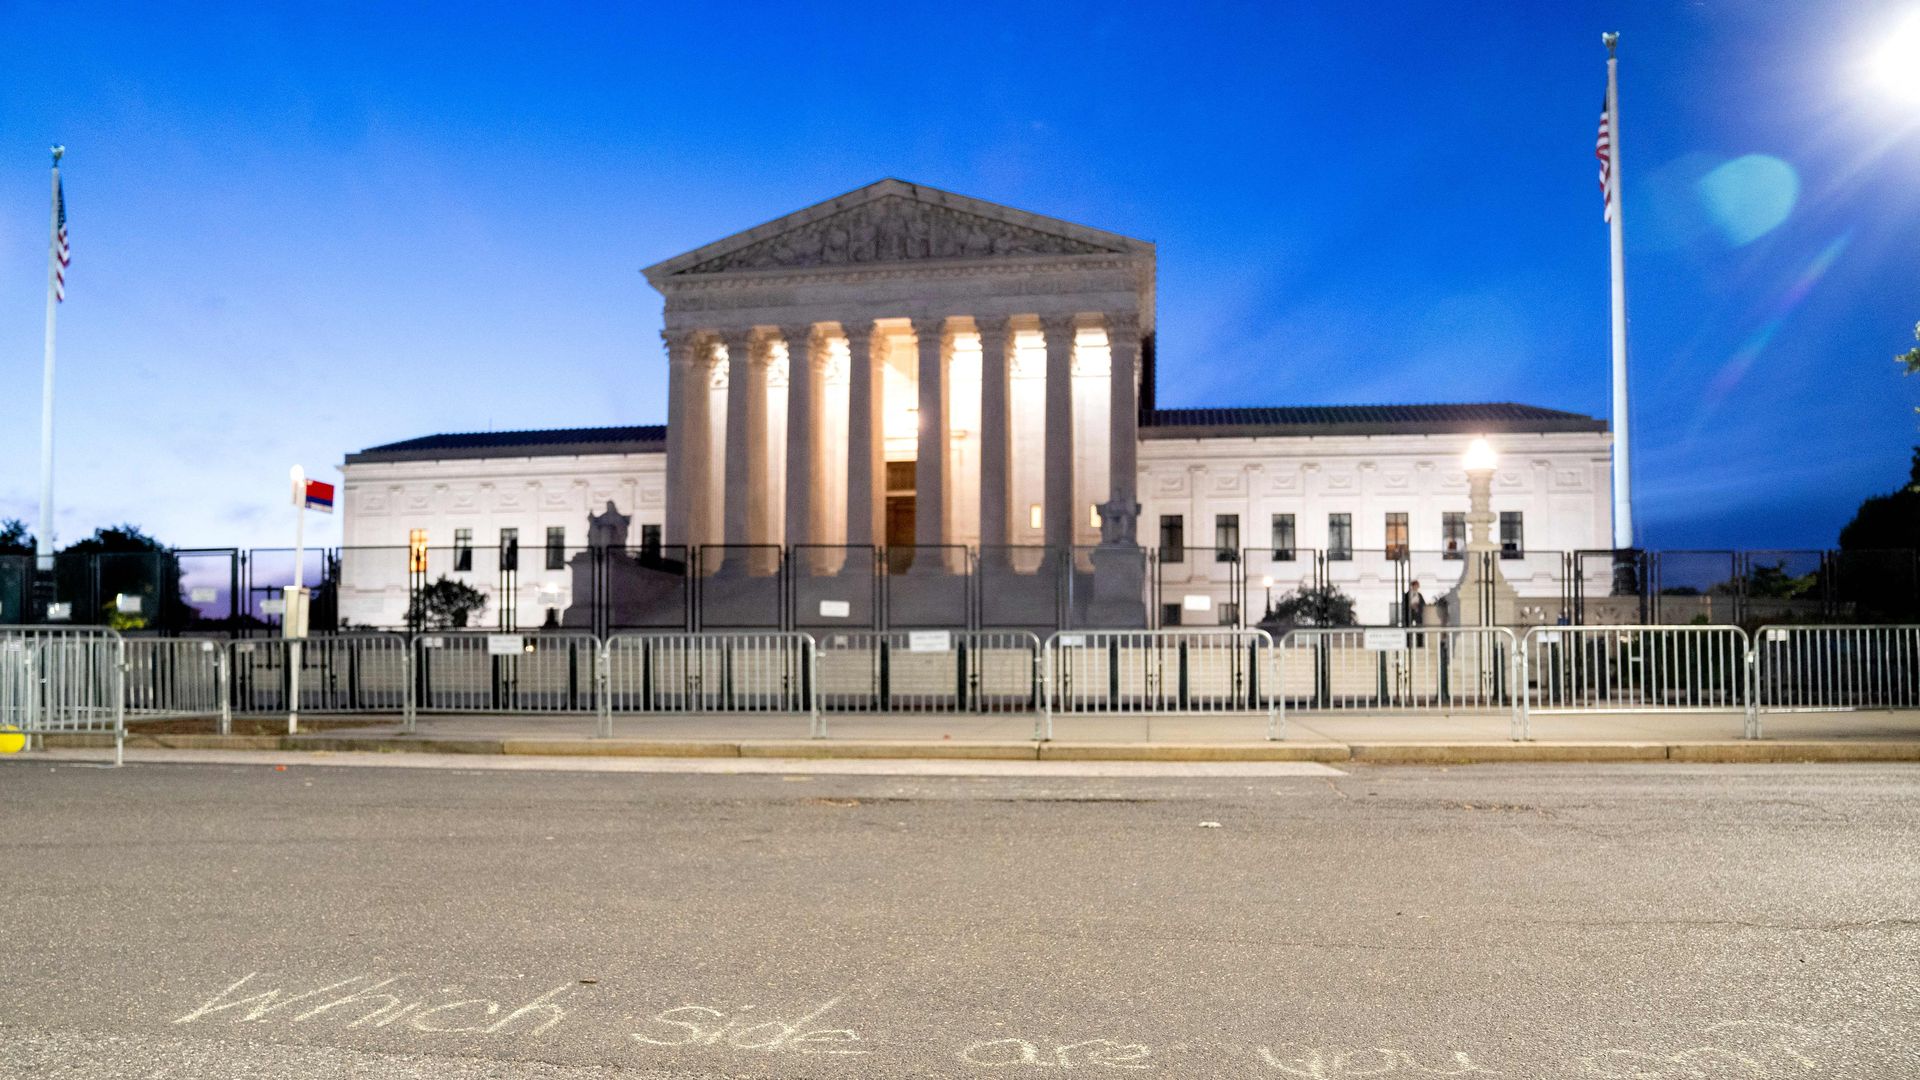 View of the Supreme Court building from the street after the sun has fallen.